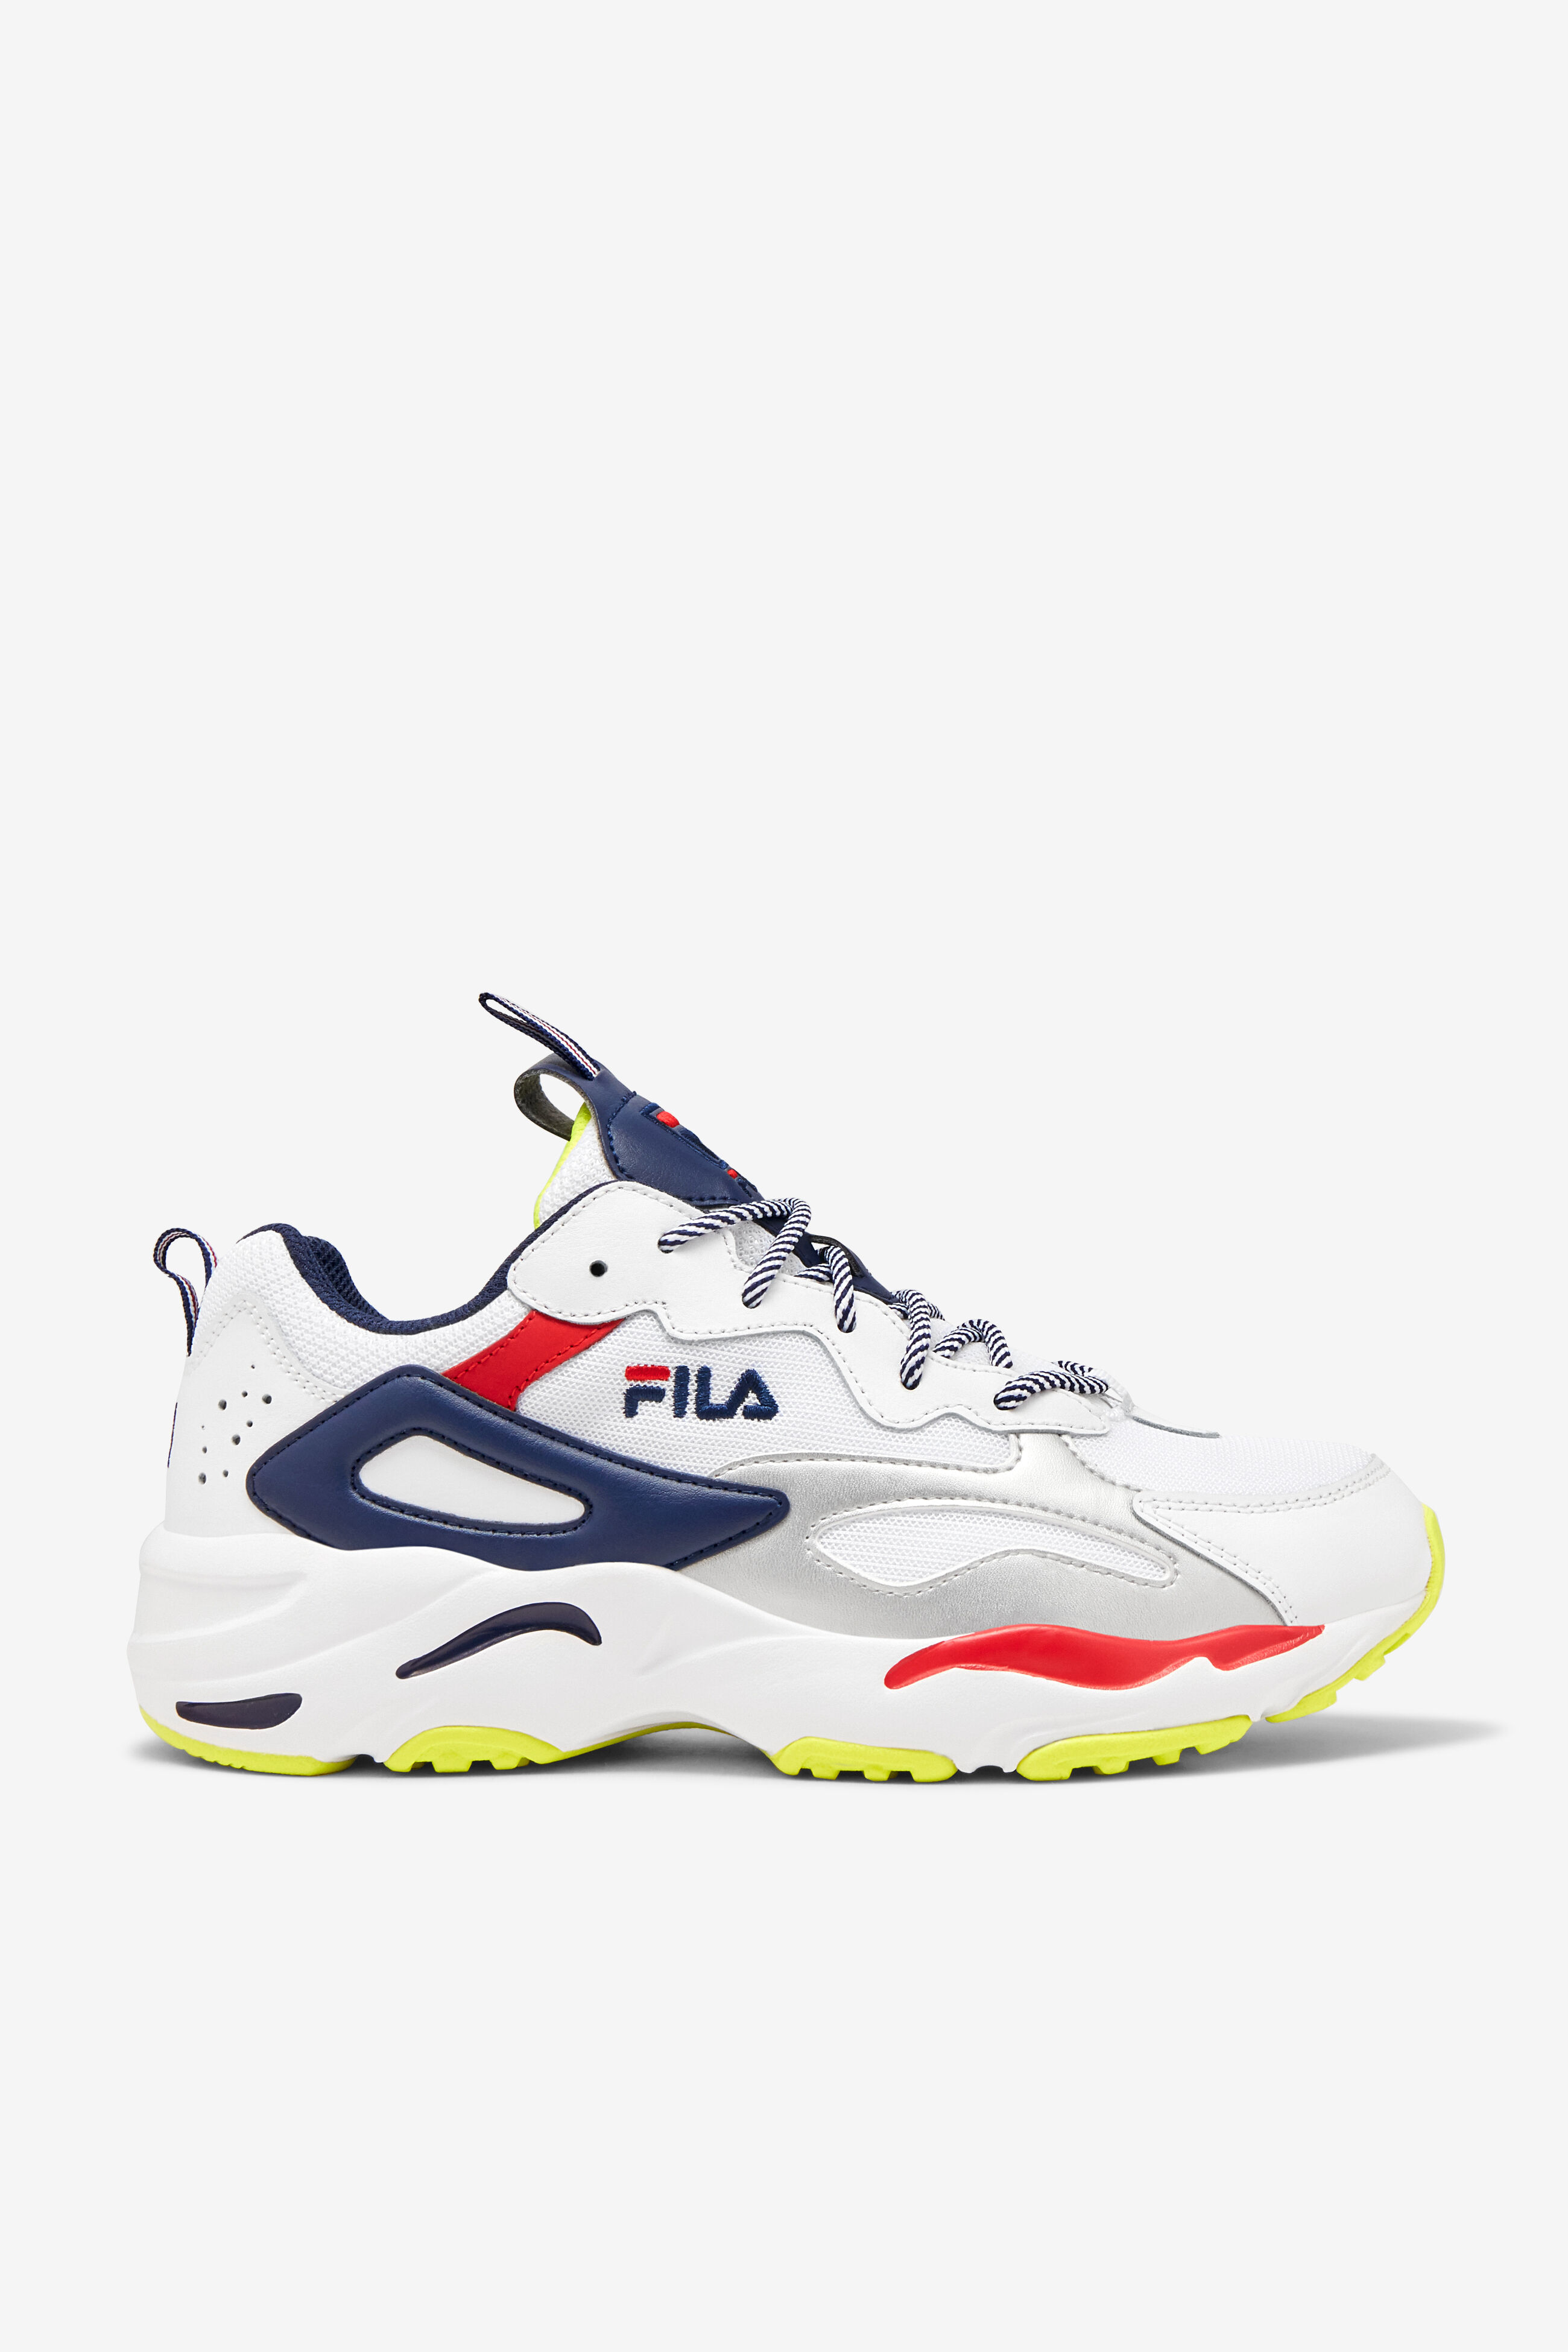 Fila Ray Tracer Sneakers #Sponsored , #sponsored, #Ray, #Fila, #Sneakers, # Tracer | Nike tennis shoes outfit, Girls sneakers, Sneakers nike